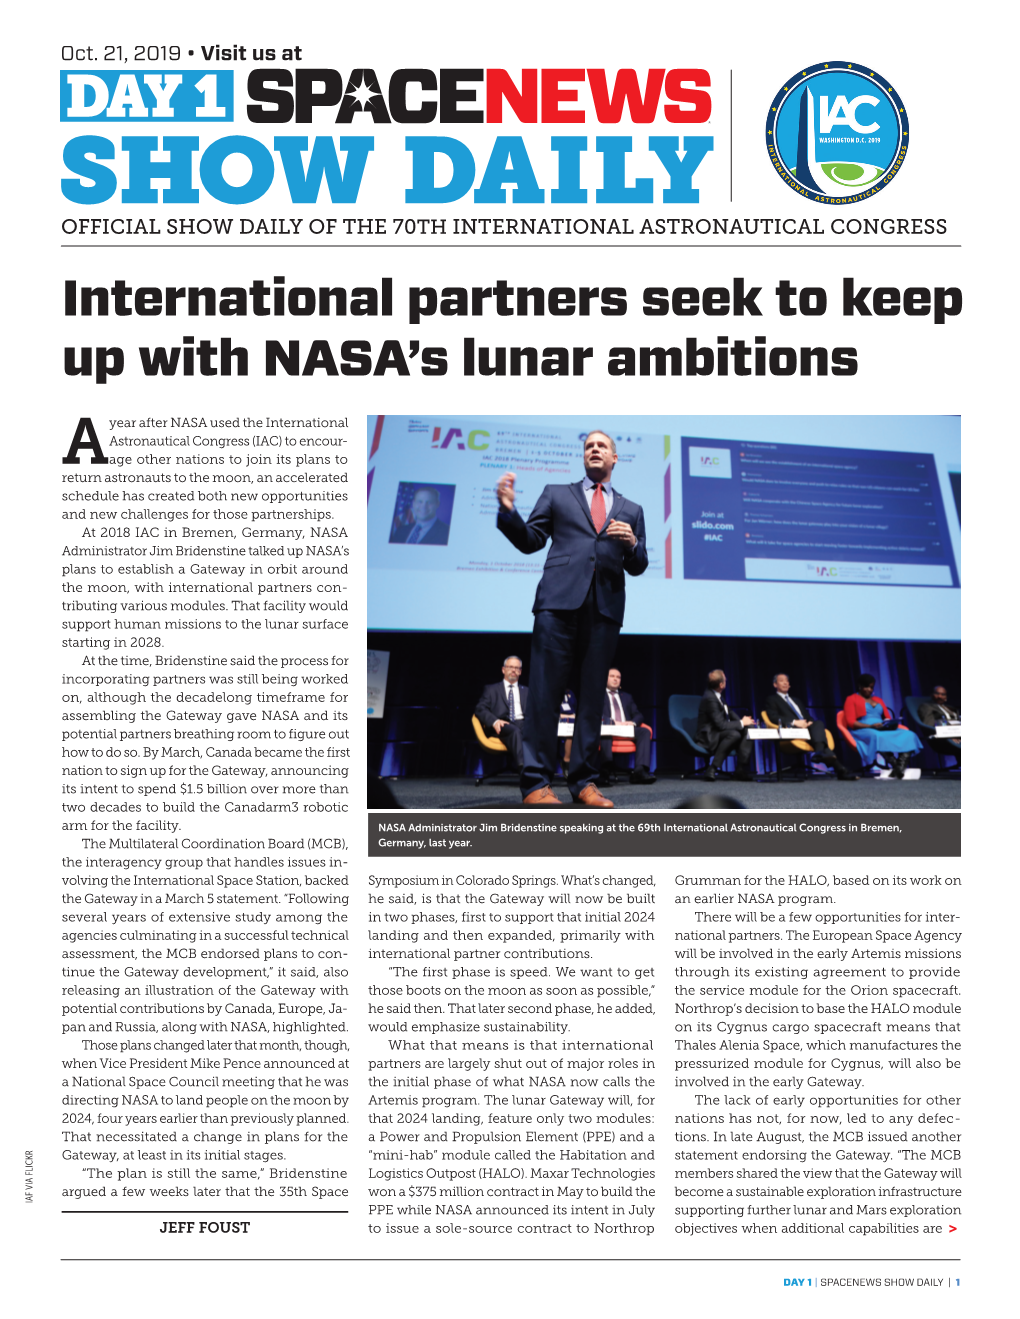 DAY 1 SHOW DAILY OFFICIAL SHOW DAILY of the 70TH INTERNATIONAL ASTRONAUTICAL CONGRESS International Partners Seek to Keep up with NASA’S Lunar Ambitions